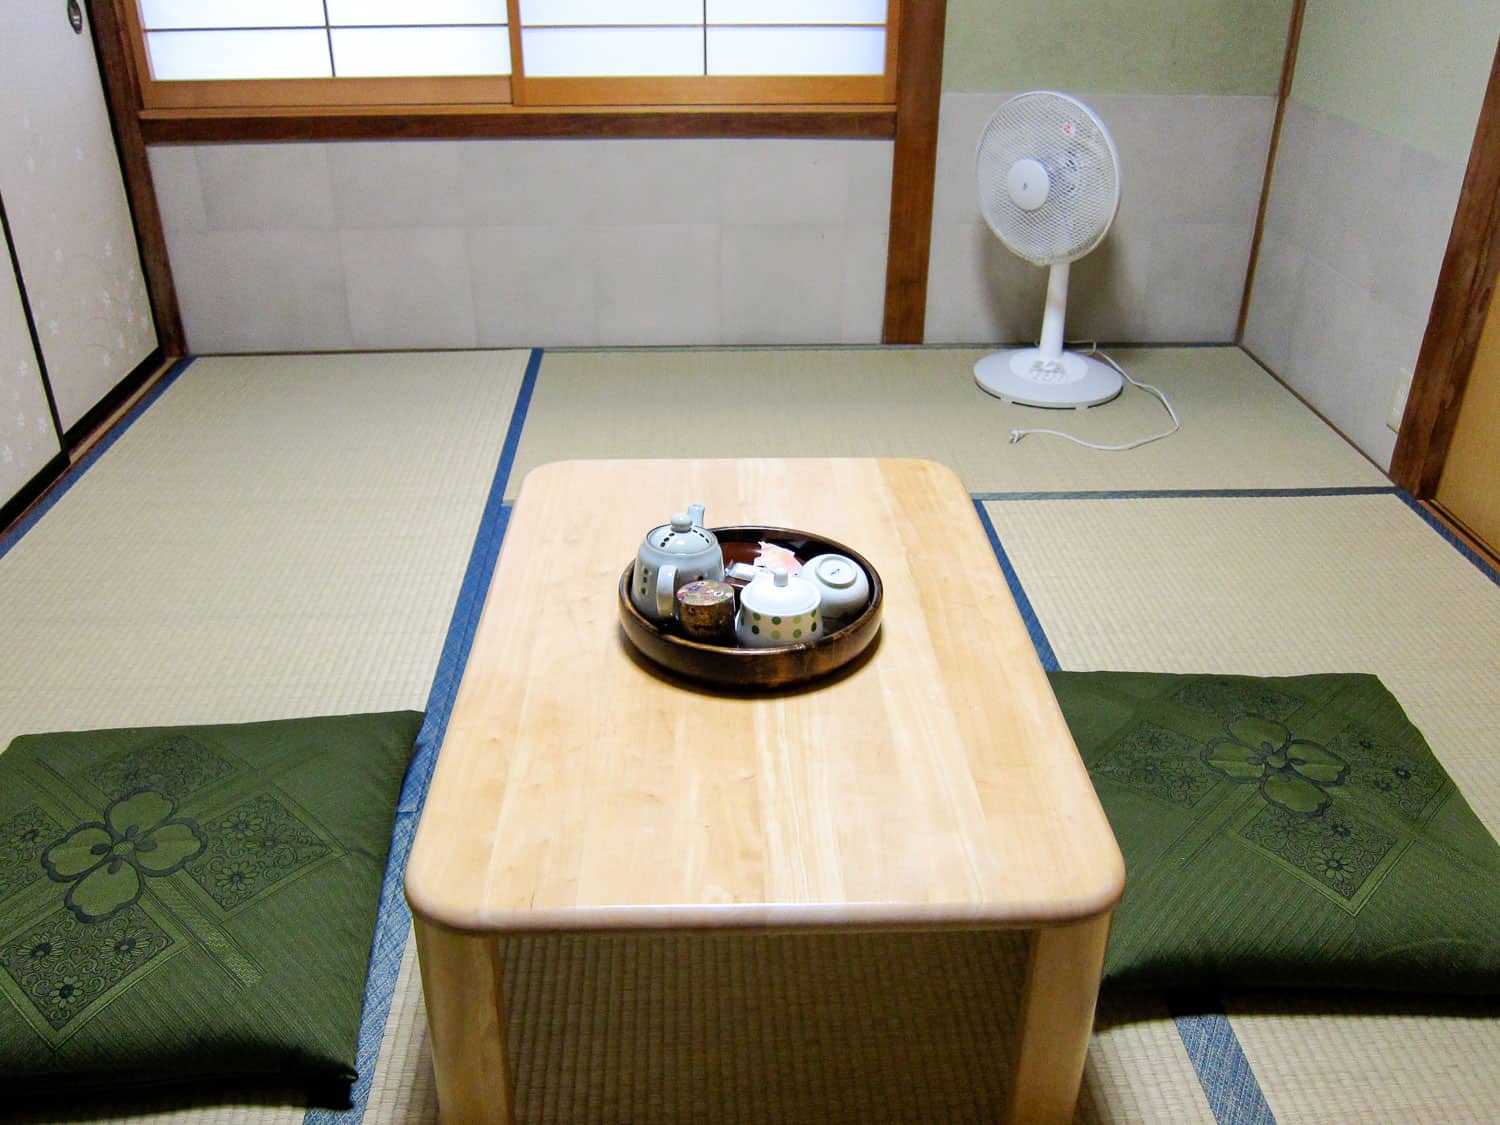 Tatami room in a minshuku, which are great places to stay in Japan if you can't afford a ryokan (traditional inn)